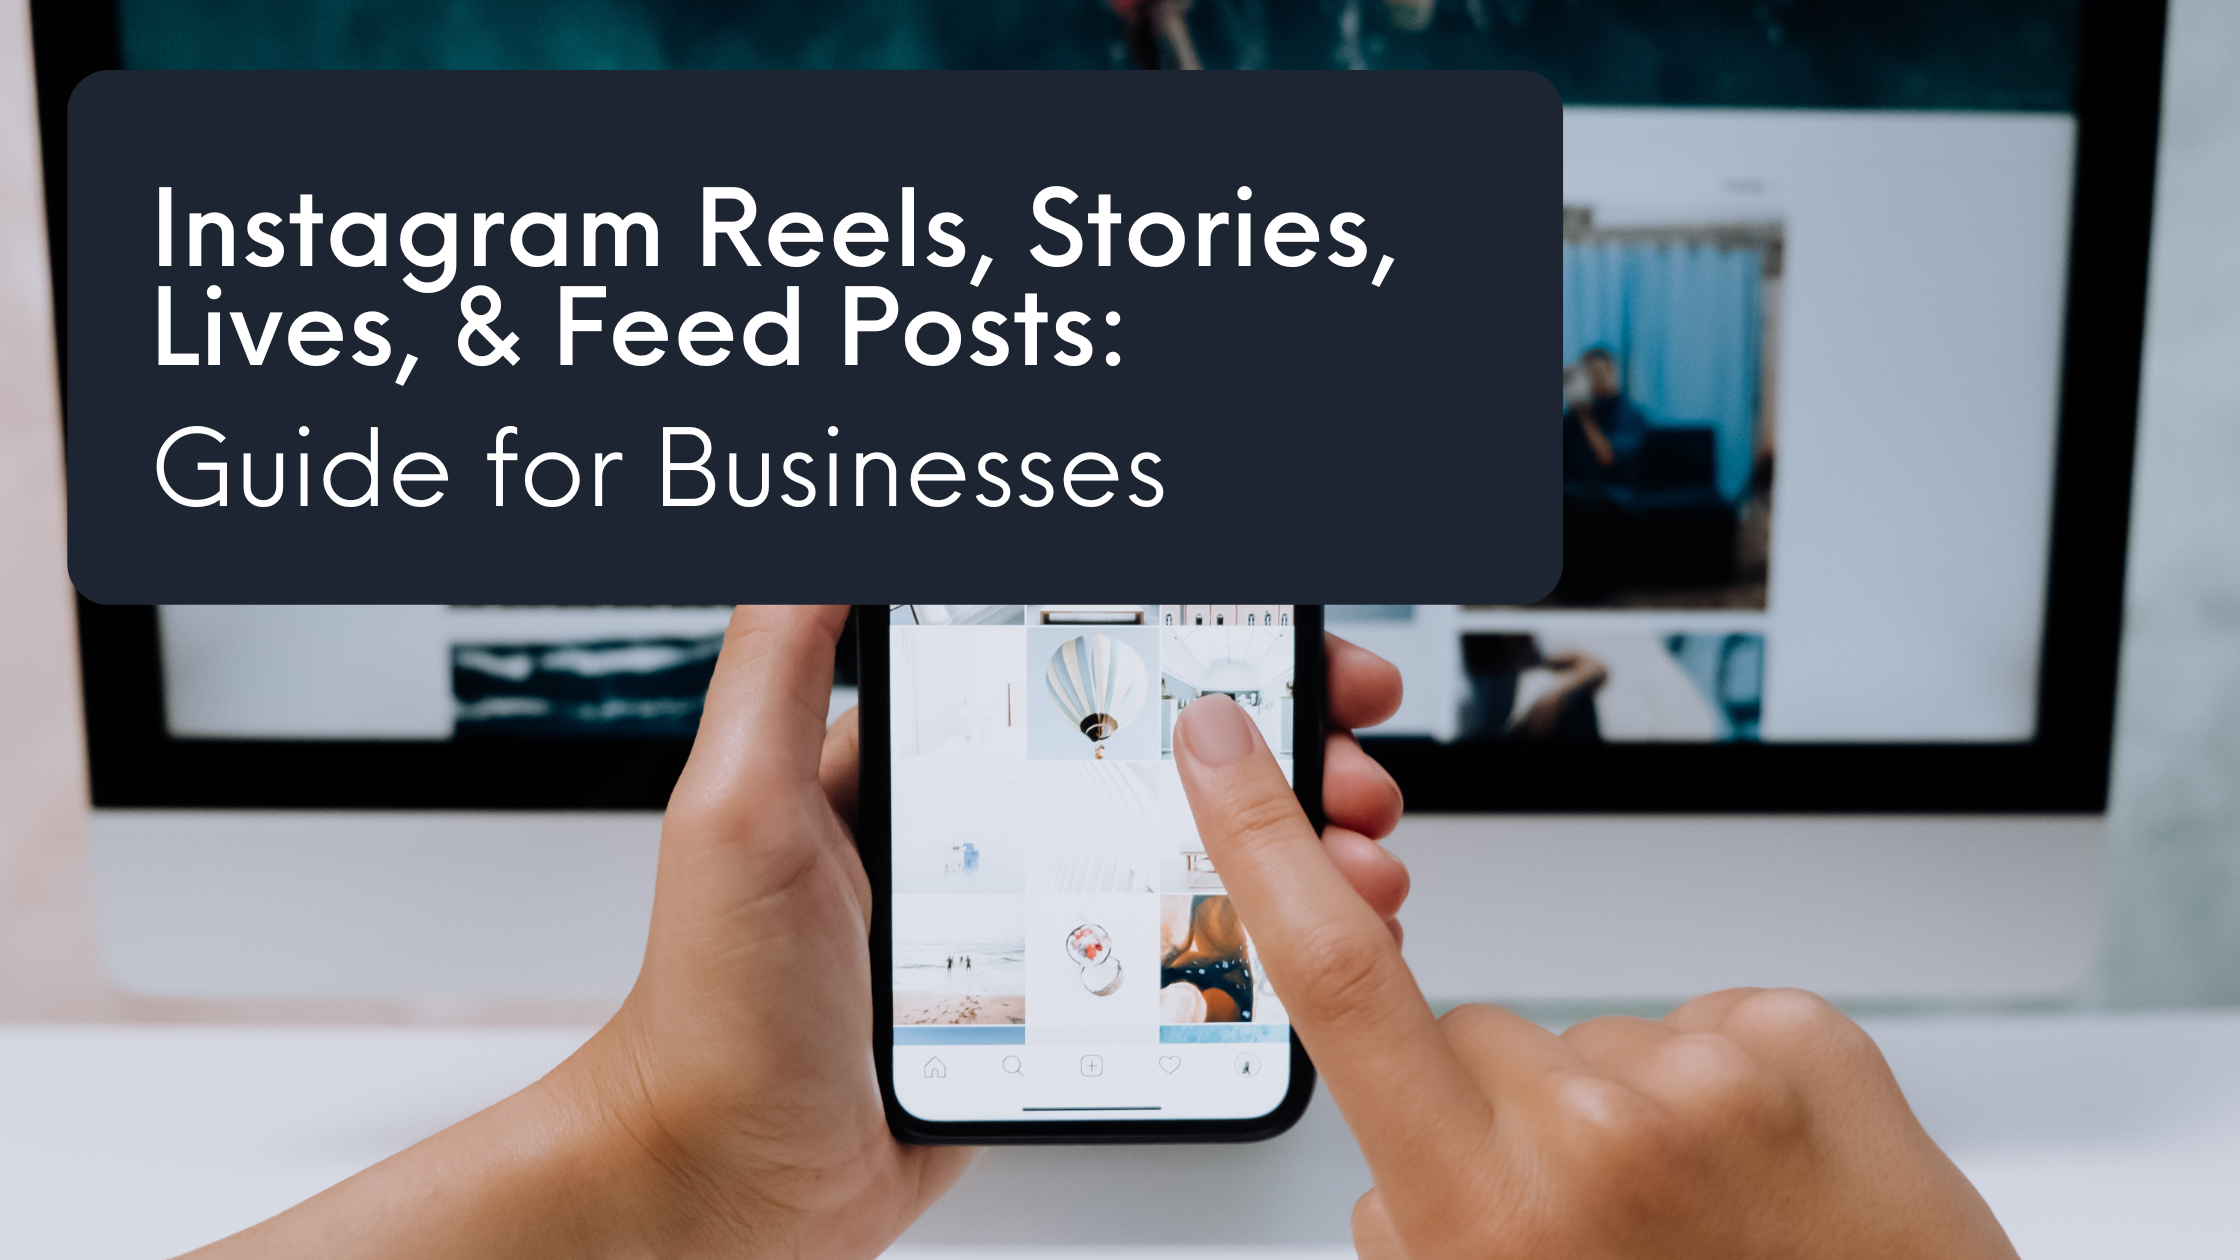 Instagram Reels, Stories, Lives, & Feed Posts: Guide for Businesses